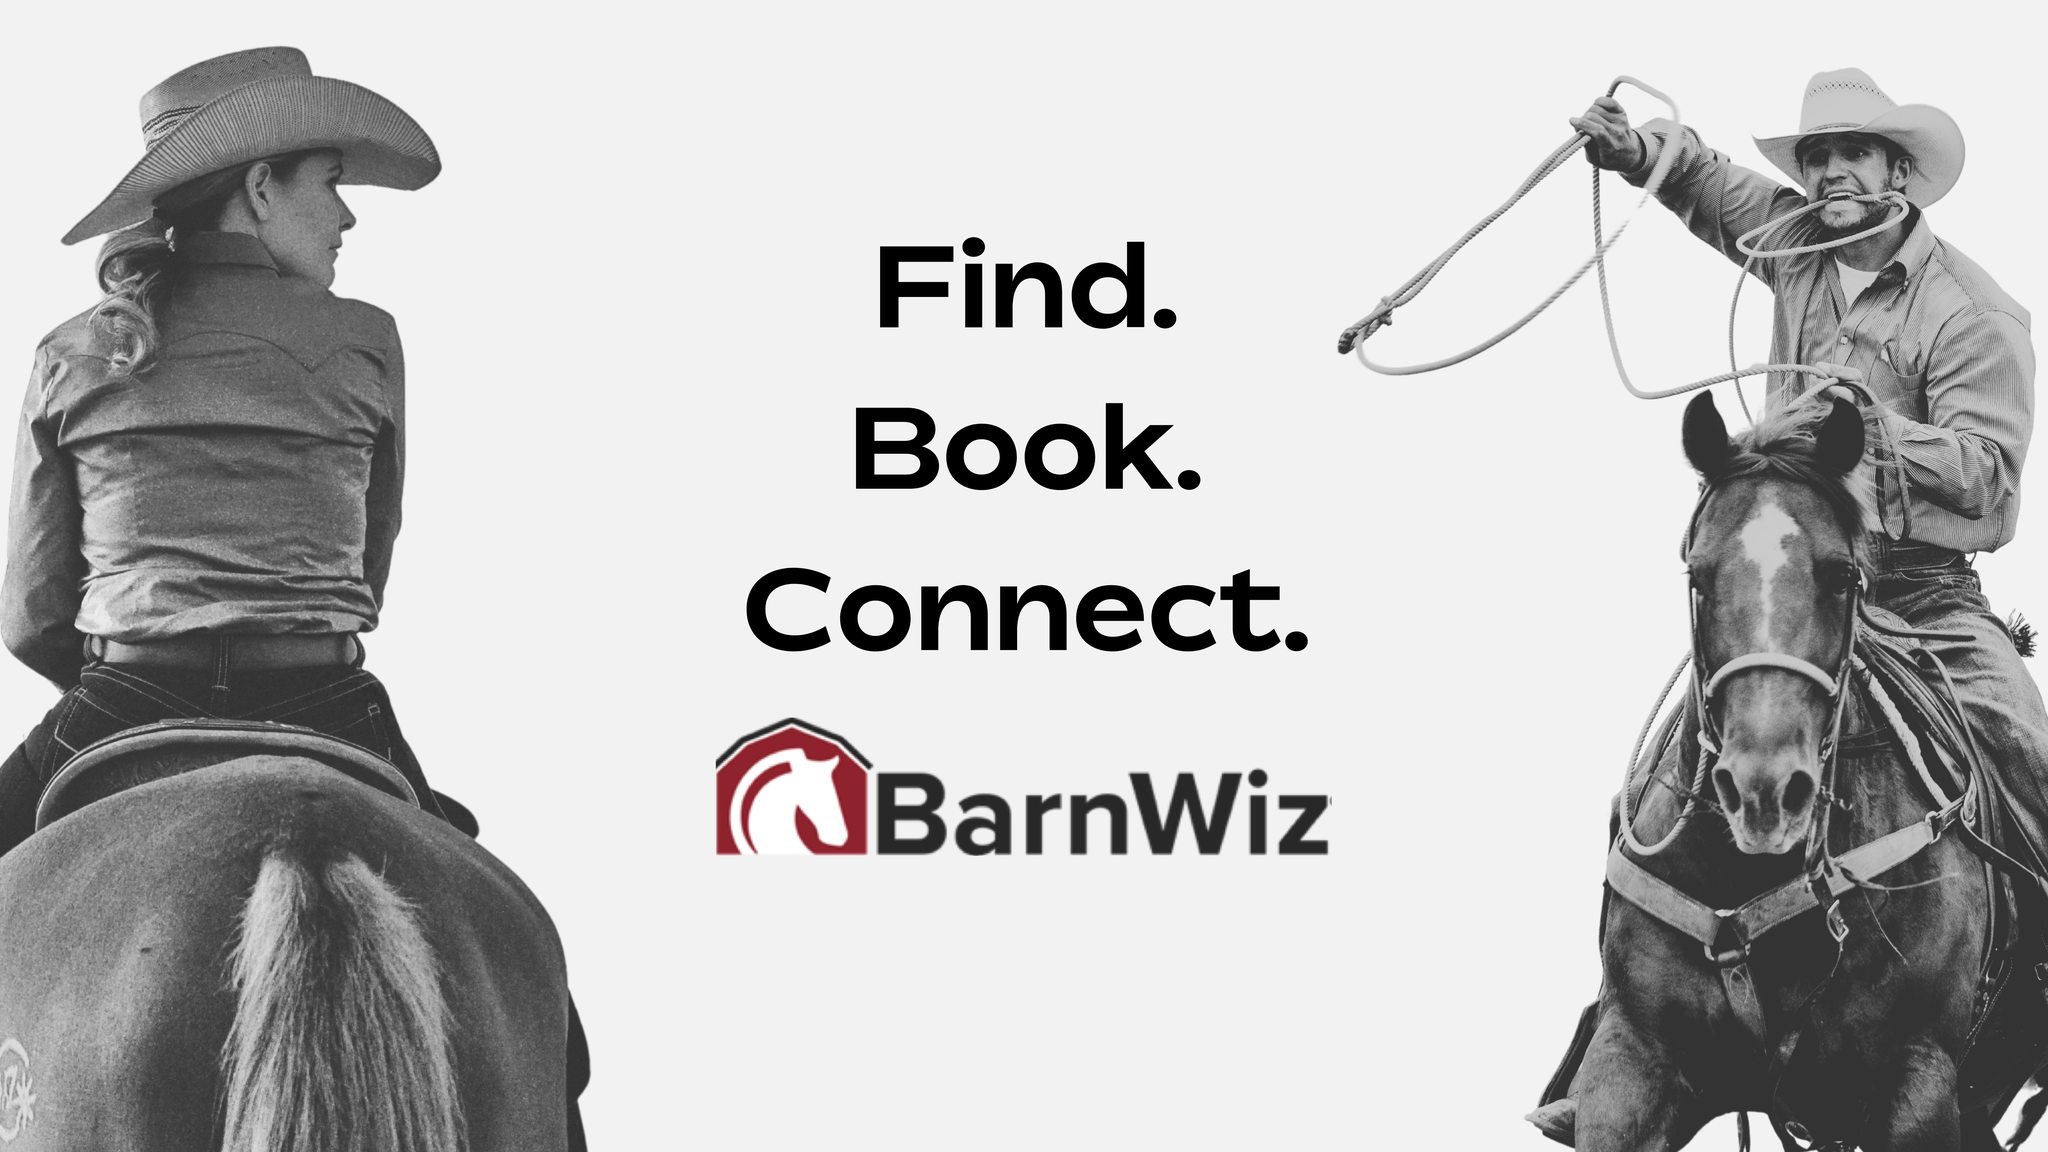 Find. Book. Connect. 

Let BarnWiz help your equestrian business thrive.

#barnwiz #cowboyup #western #cowgirlhat #horseriding #ranching #horsebusiness #roping #quarterhorse #equestrianlife